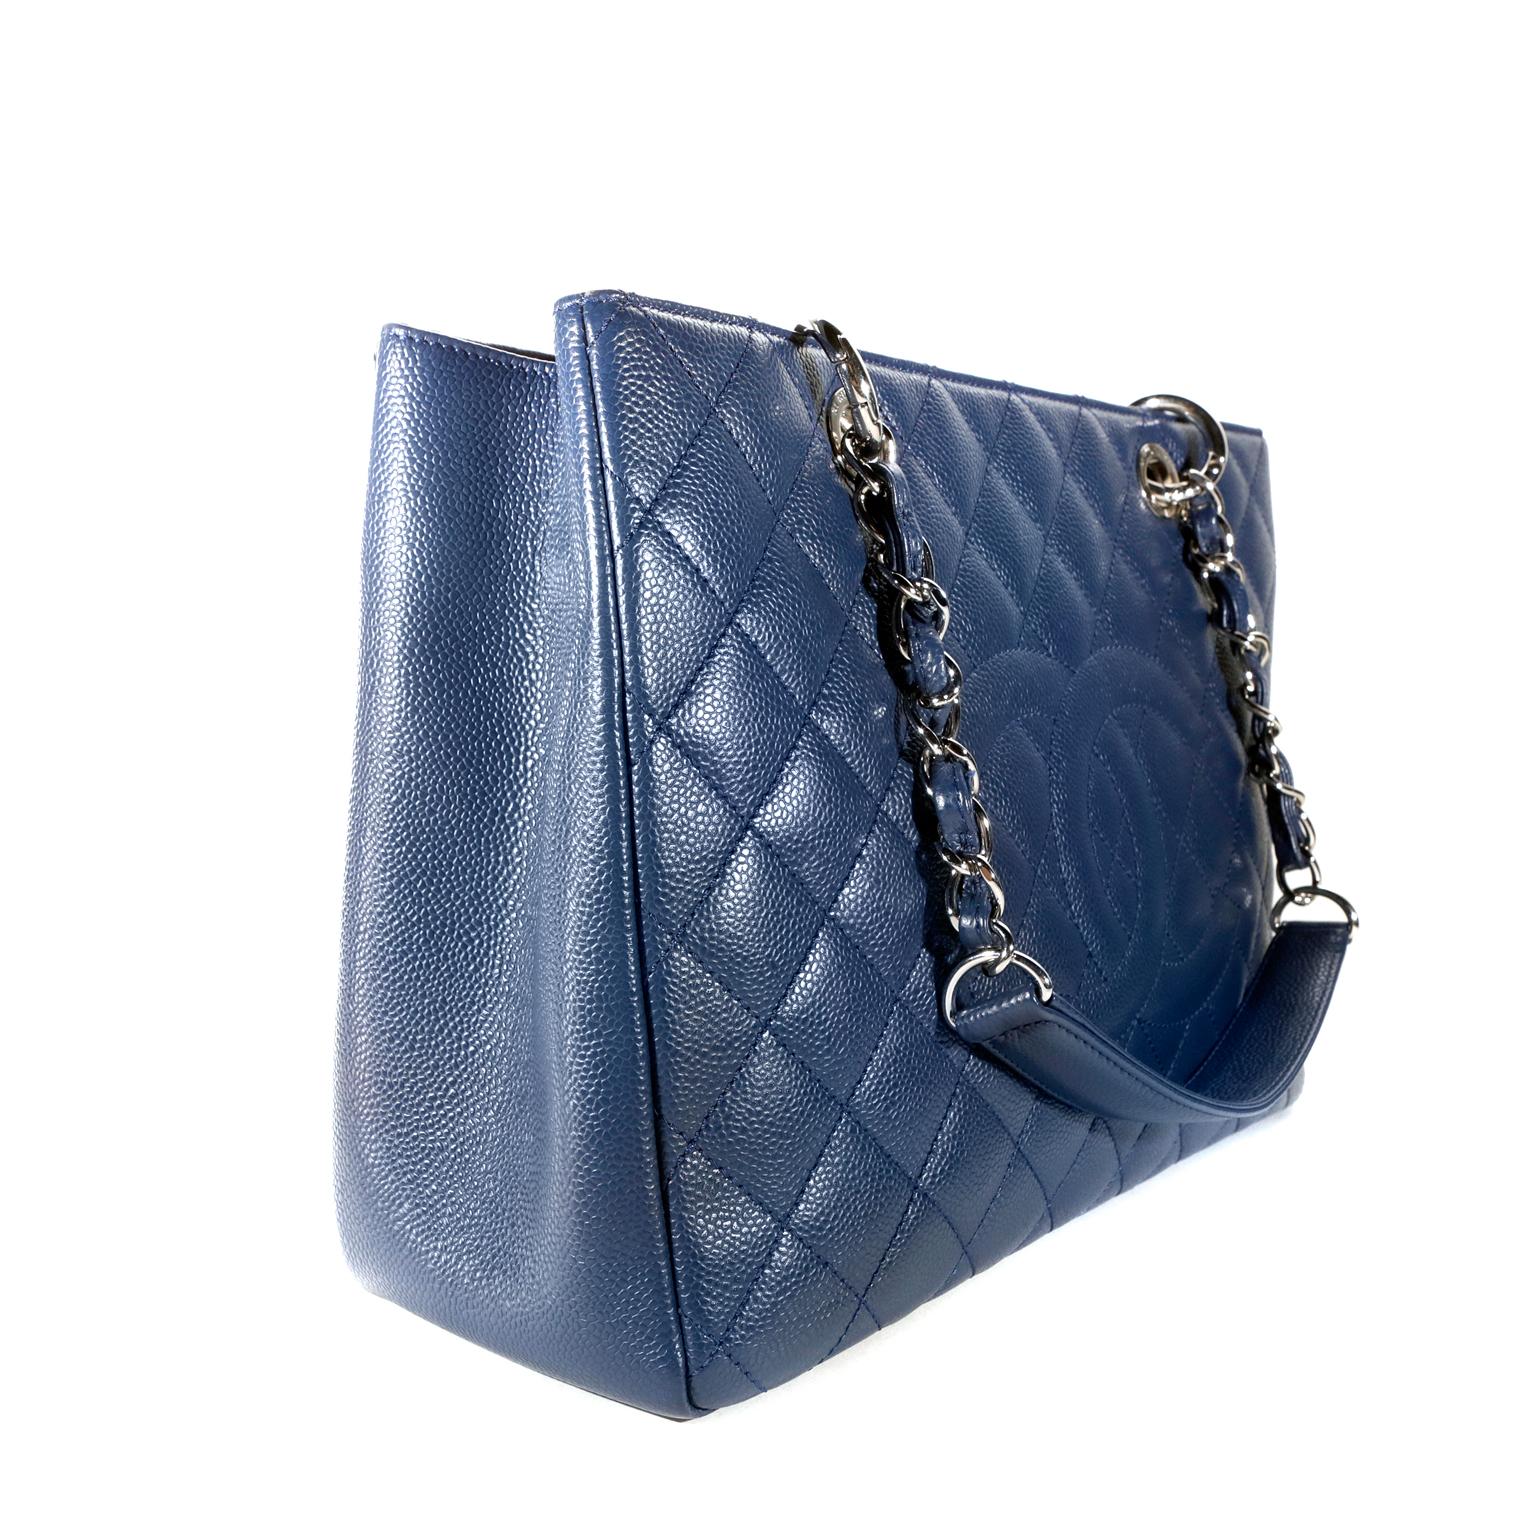 Chanel Blue Caviar Grand Shopping Tote-  pristine condition
Chanel’s beloved GST is part of the timeless classics collection and is an essential piece for any sophisticated wardrobe.  
Durable dark blue caviar leather is quilted in signature Chanel